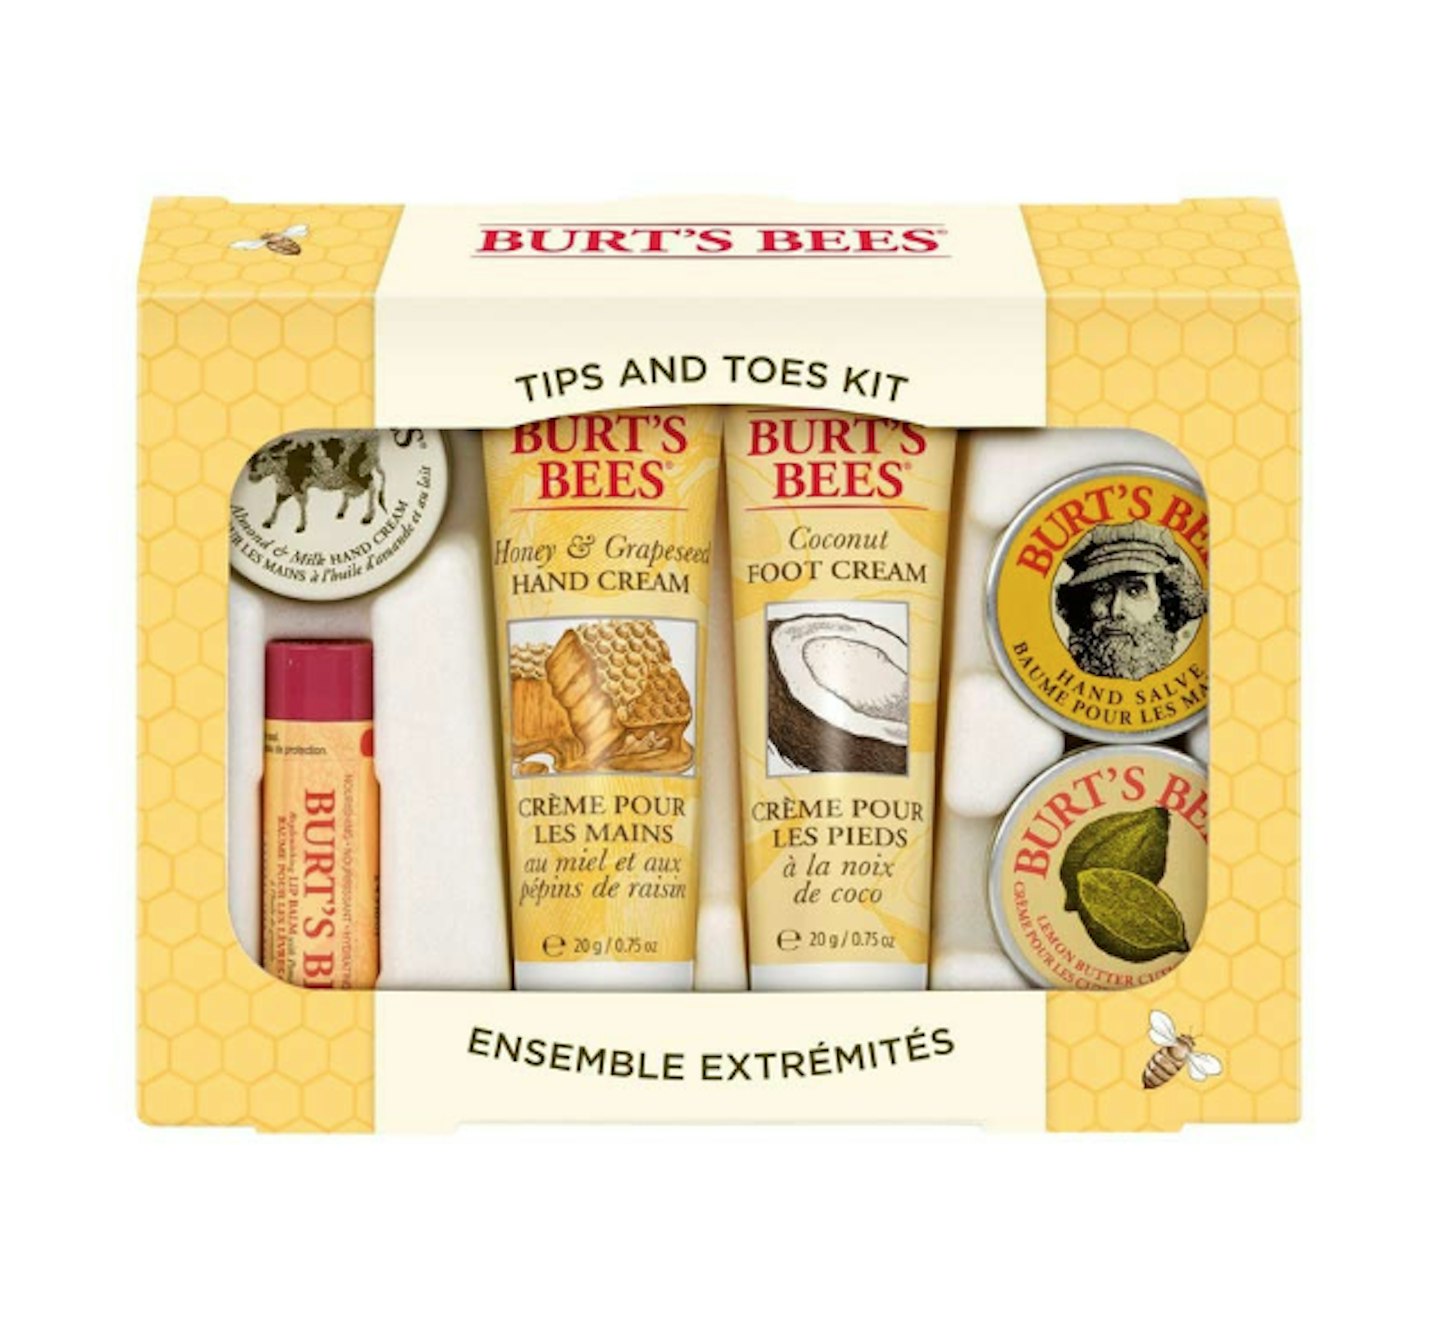 Burt's Bees Tips and Toes Kit Travel Size, 15.99